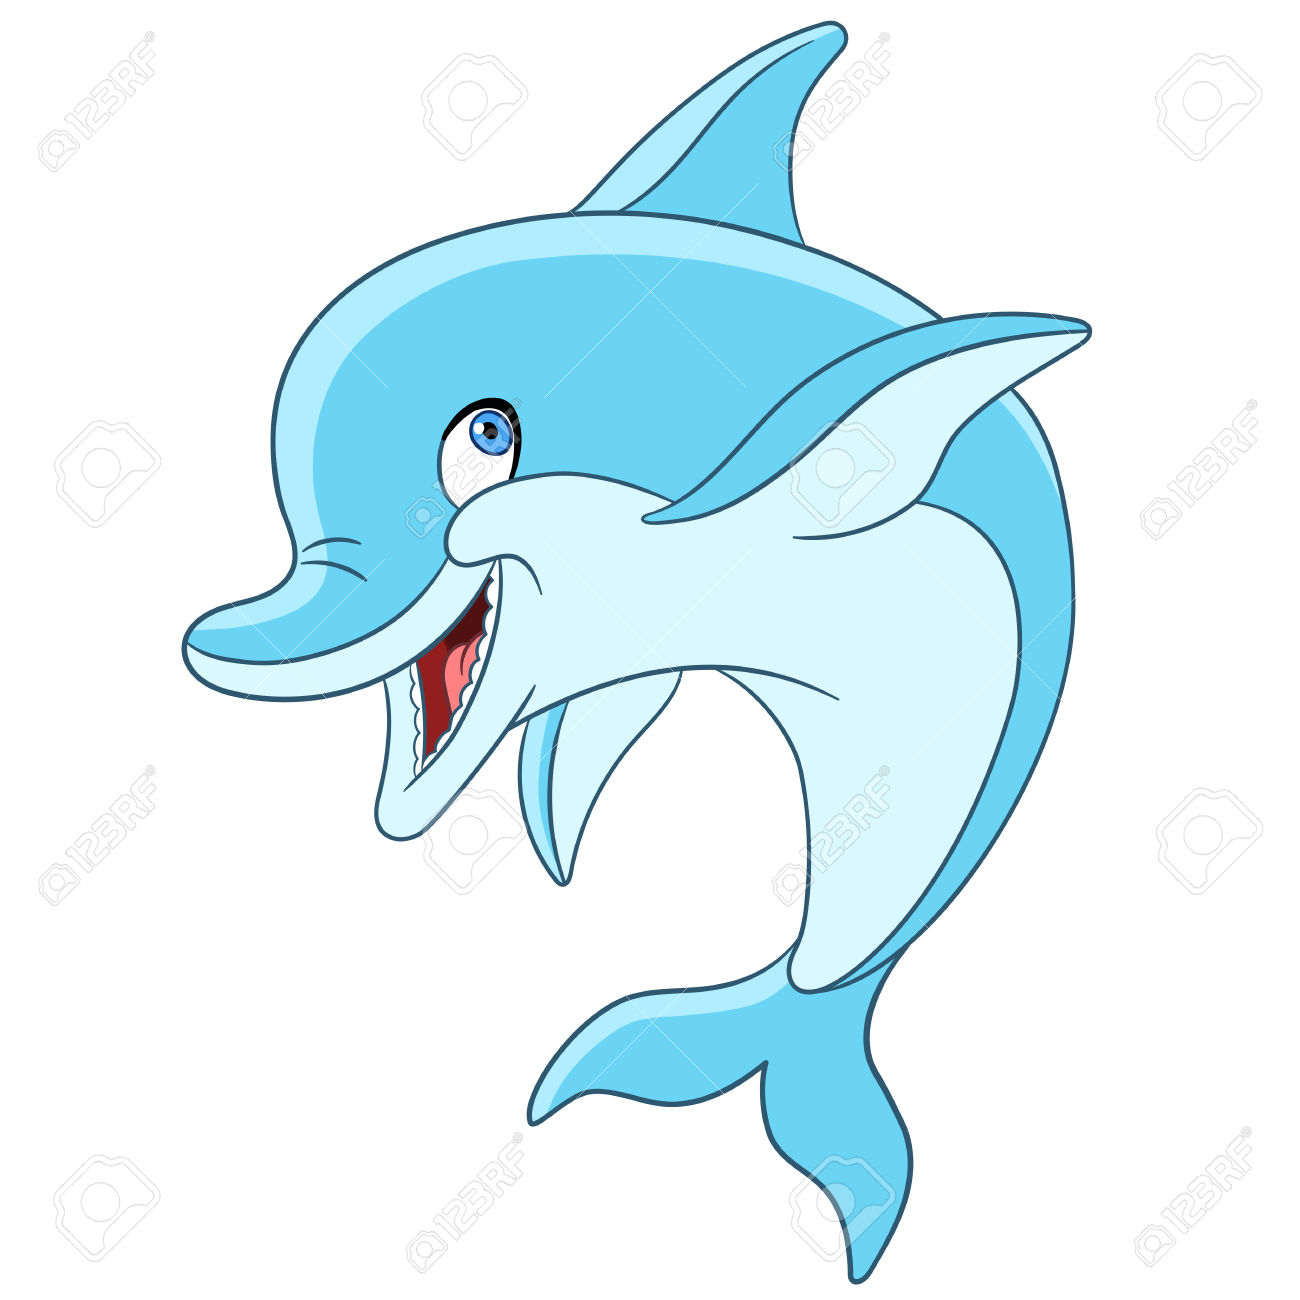 cartoon dolphin images | free download on clipartmag